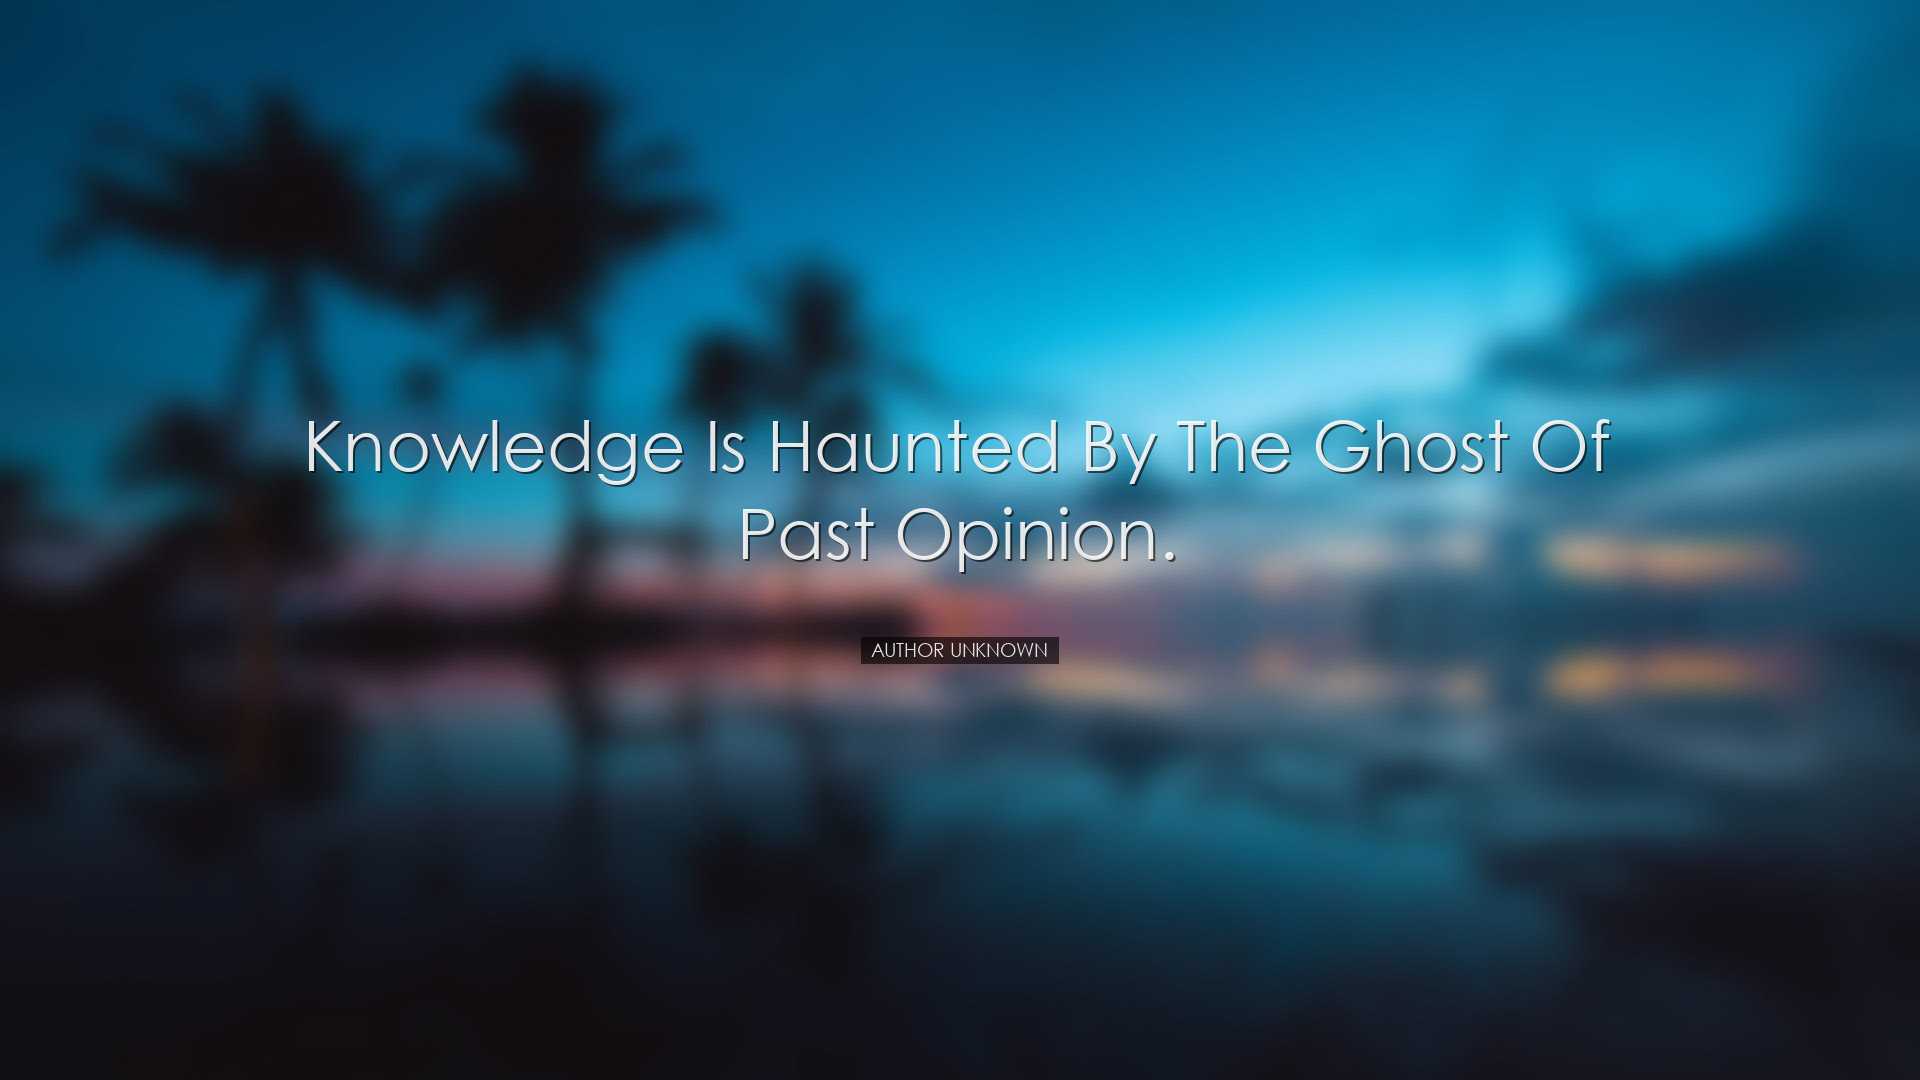 Knowledge is haunted by the ghost of past opinion. - Author Unknow